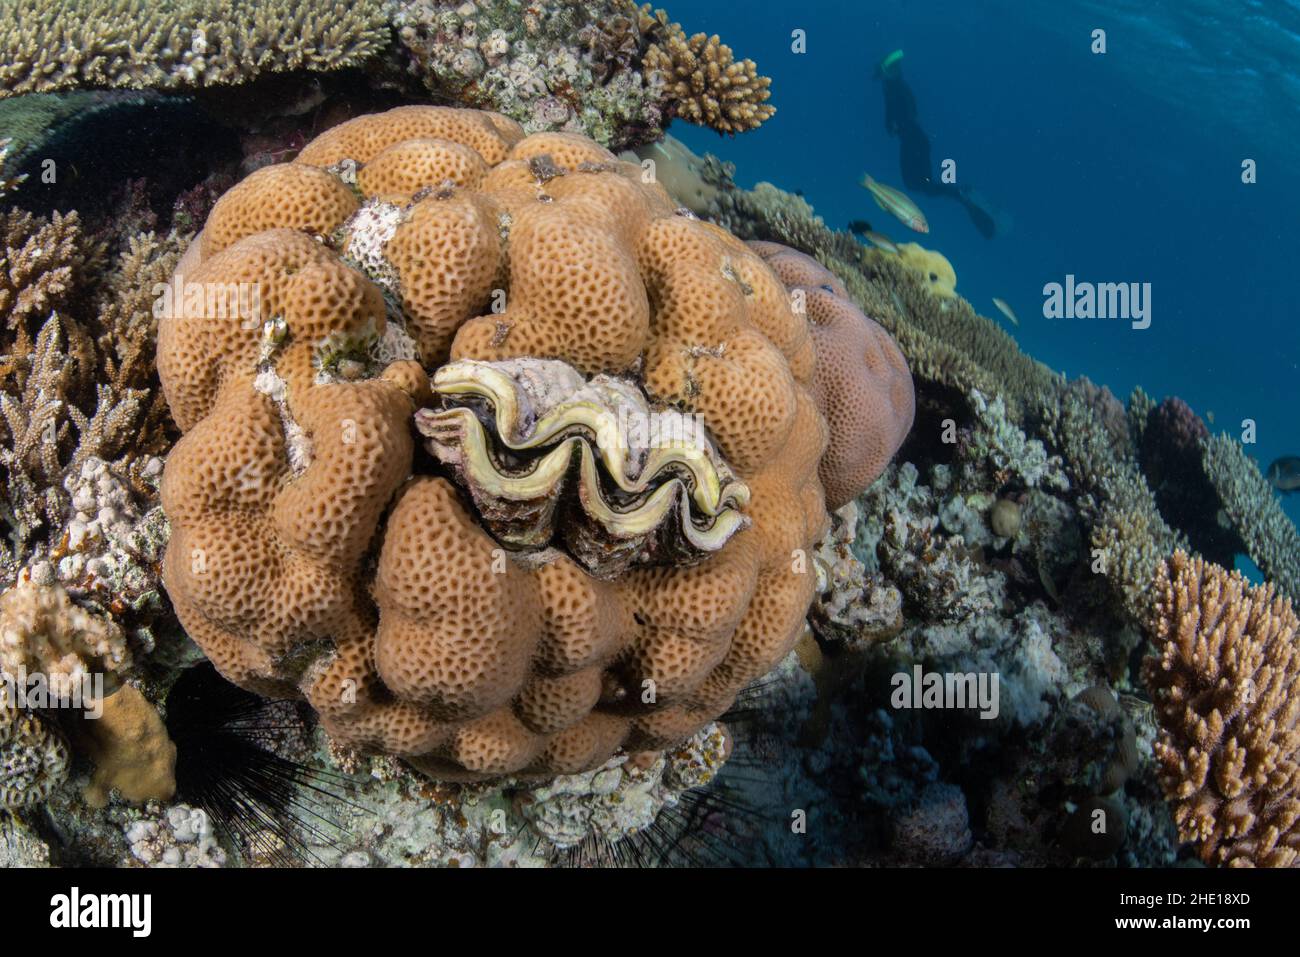 A giant clam in the Tridacna genus on a coral reef in the Red sea of Egypt. Stock Photo